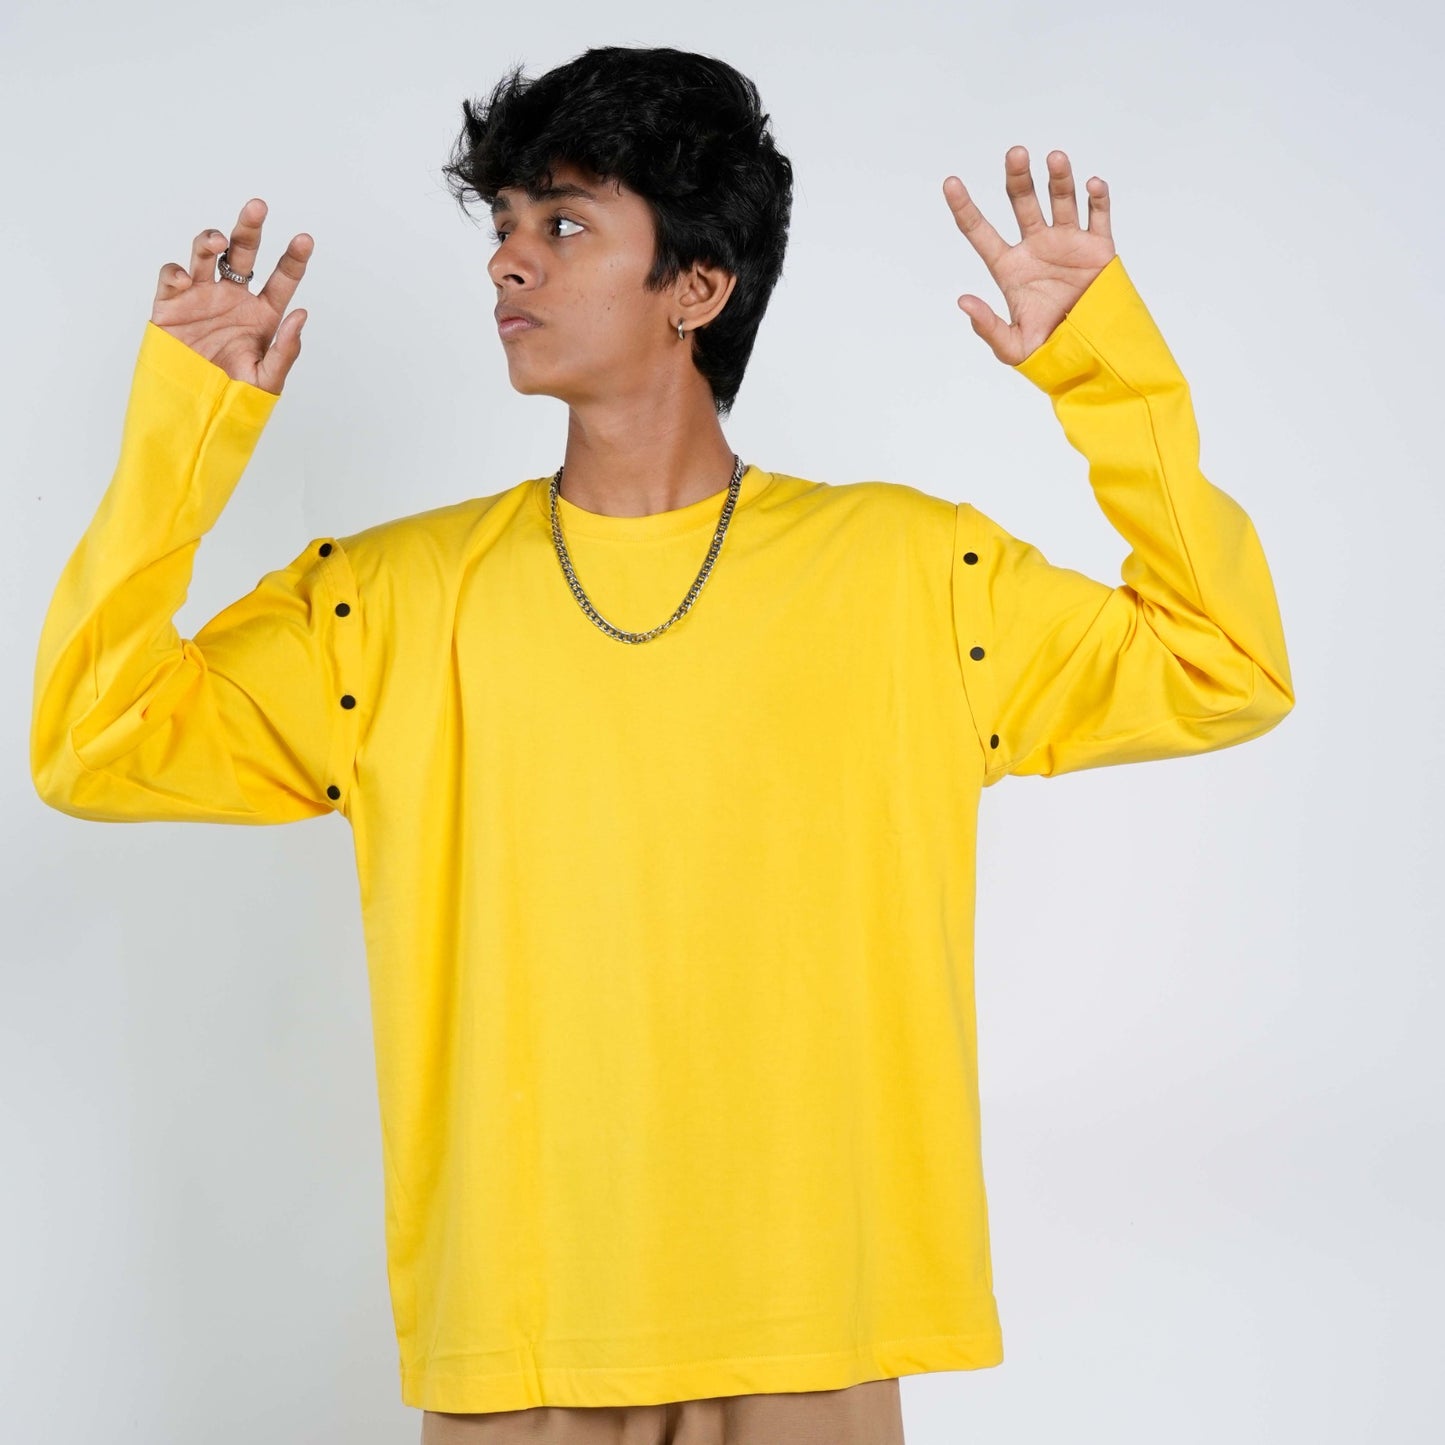 SONIBROS Sunshine Trio: Yellow 3-in-1 T-Shirt Set ( AVAILABLE IN XL SIZE )